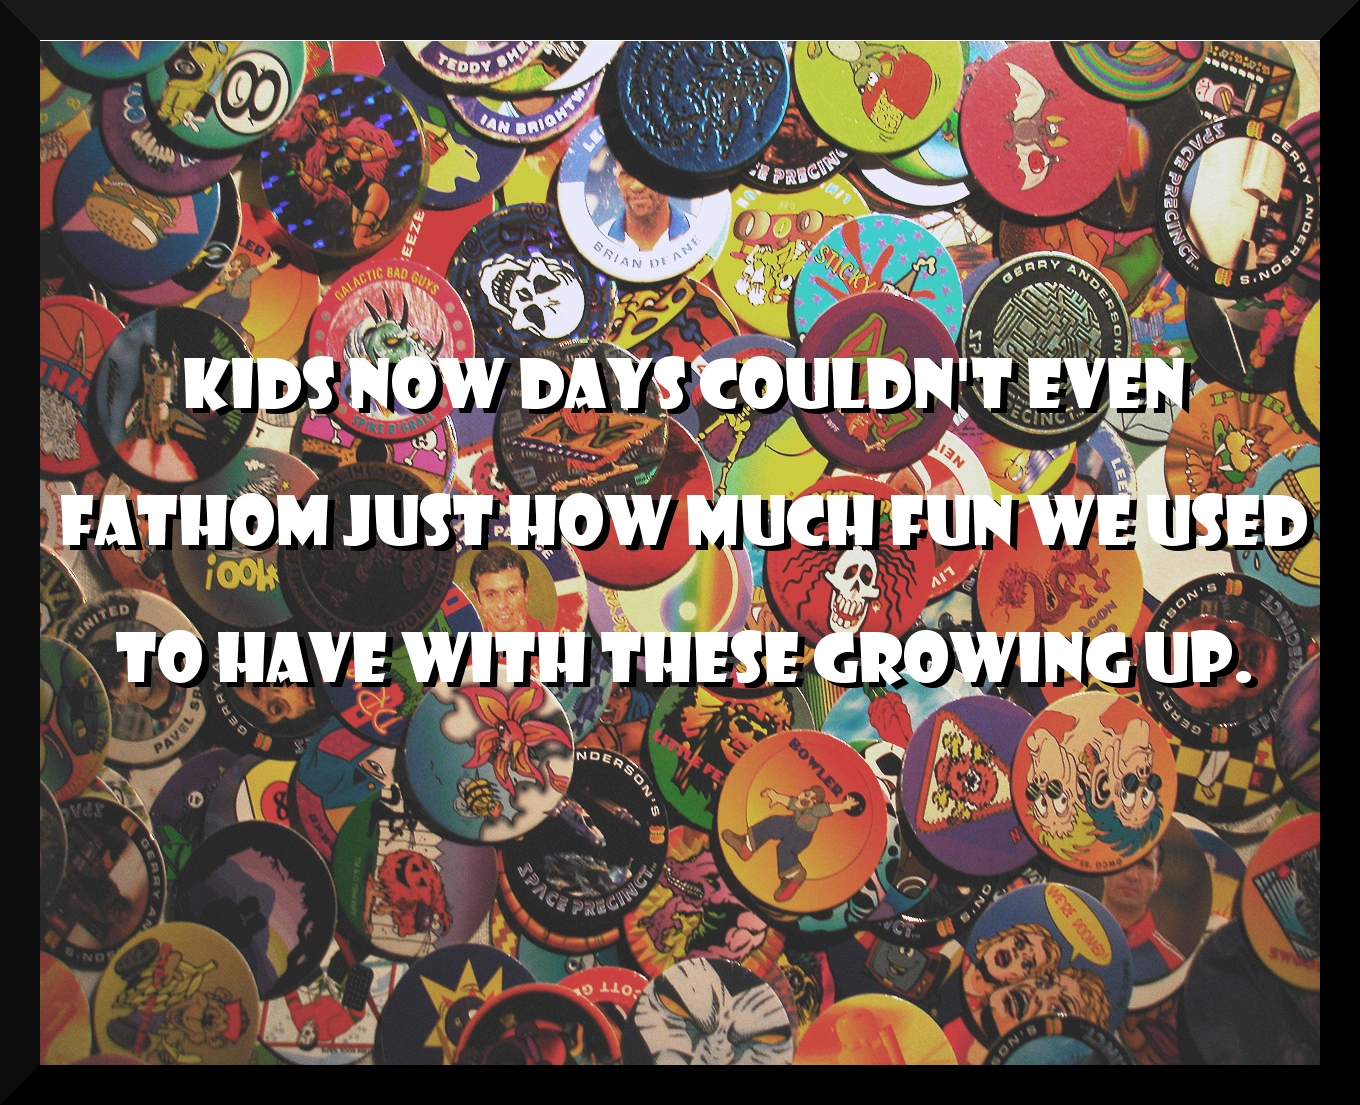 As a child, Pogs were one of the single greatest toys that we had.